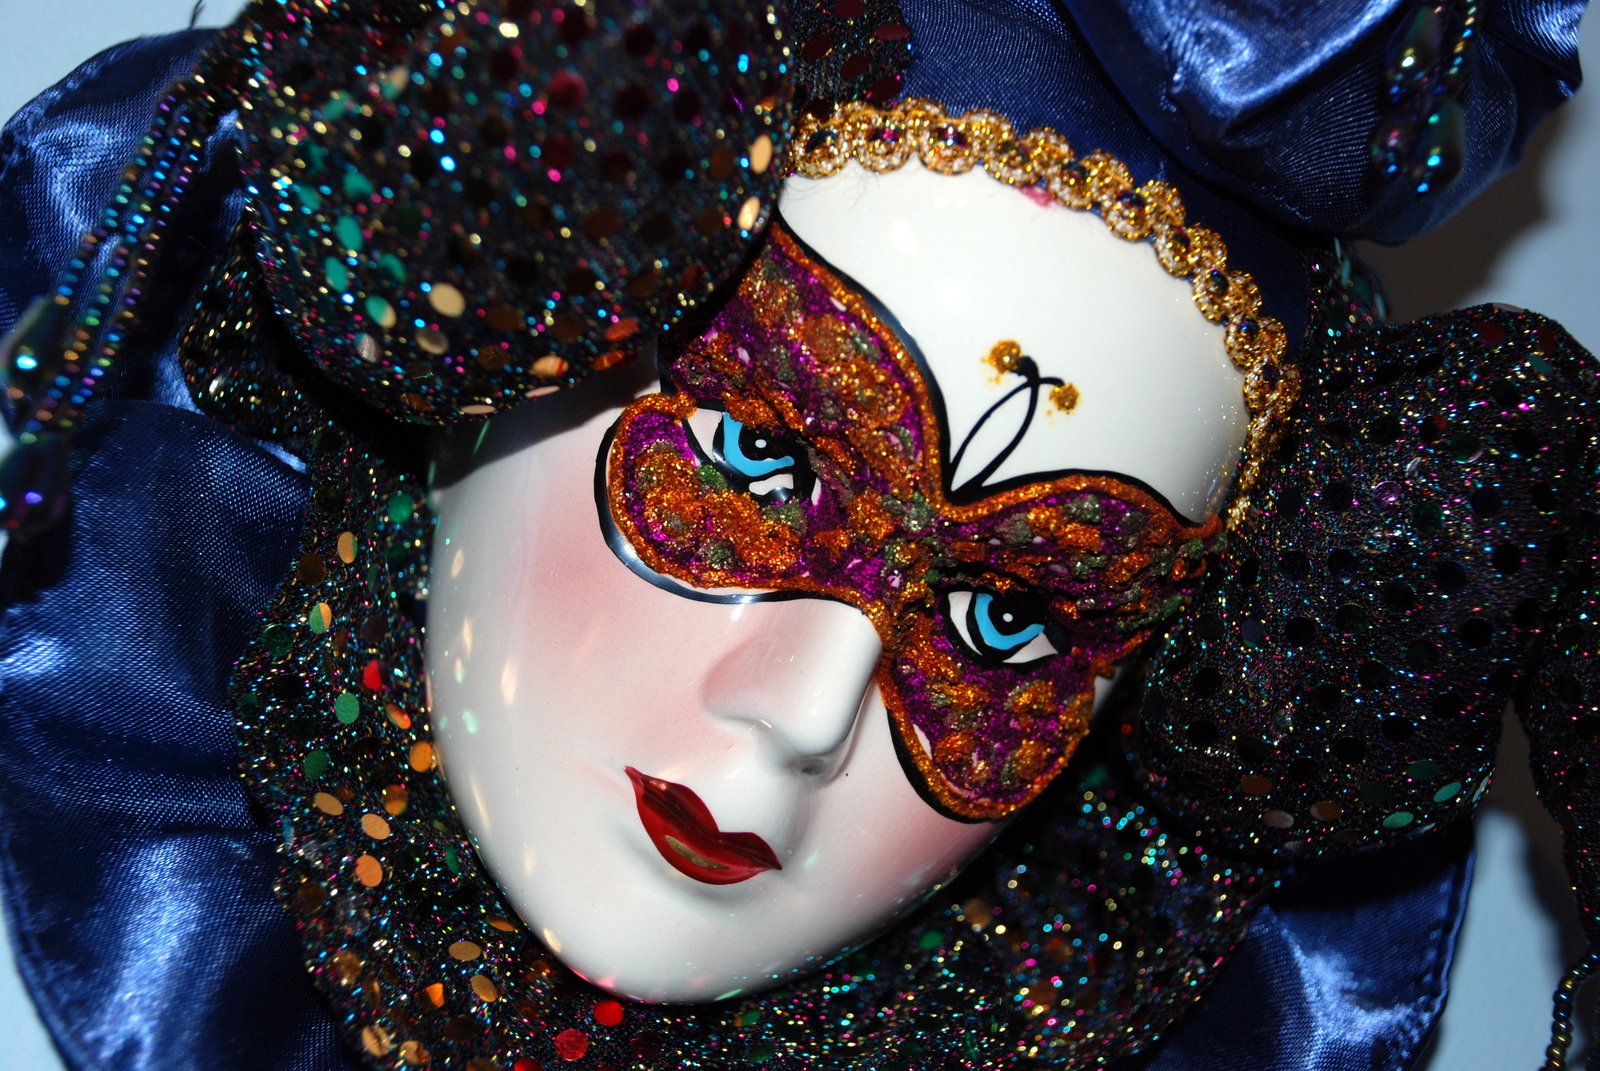 a woman wearing a mask with colorful beads and jewels